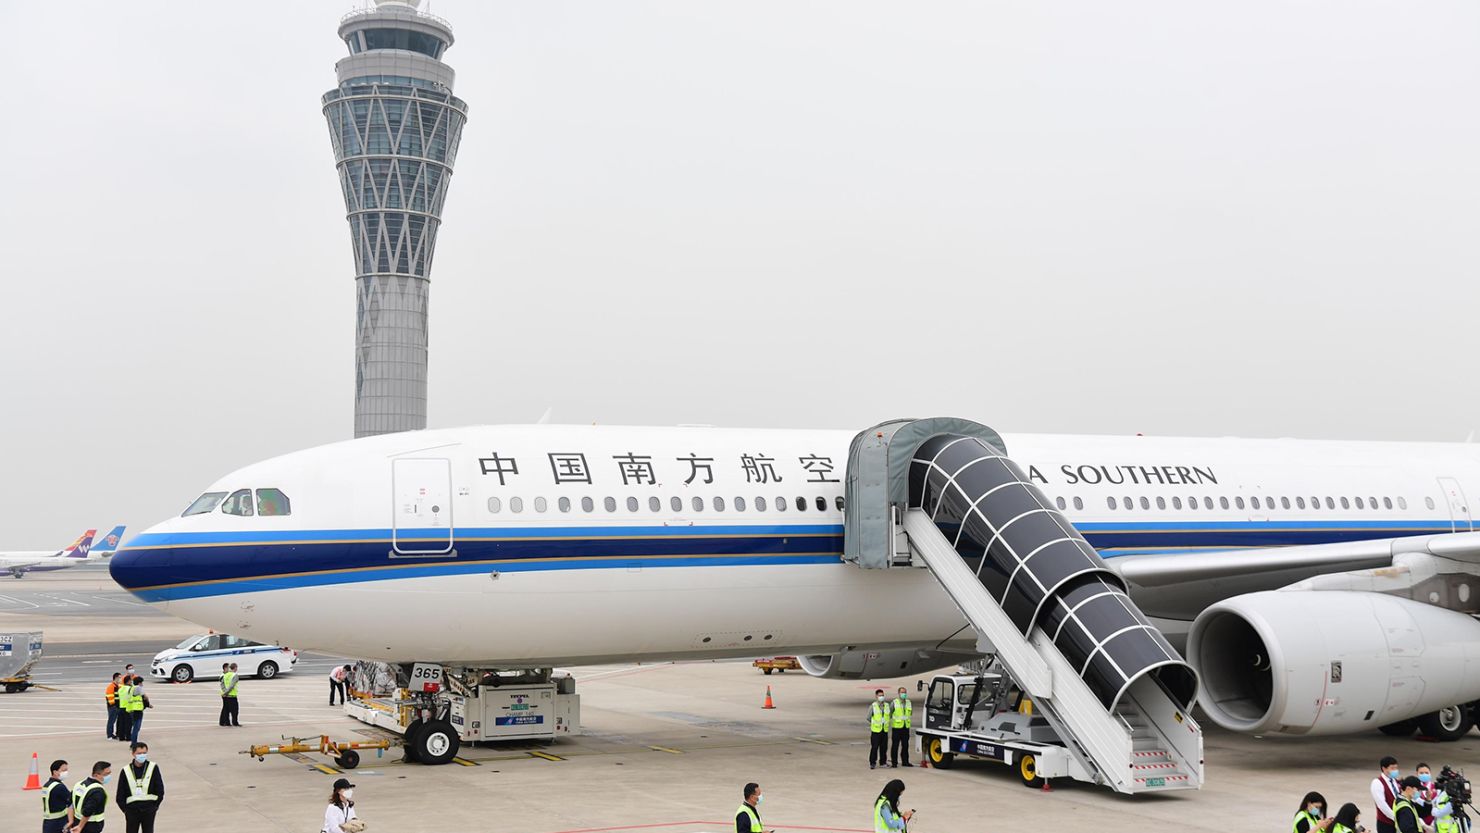 A China Southern Airlines flight prepares to take off from Shenzhen Bao'an International Airport.